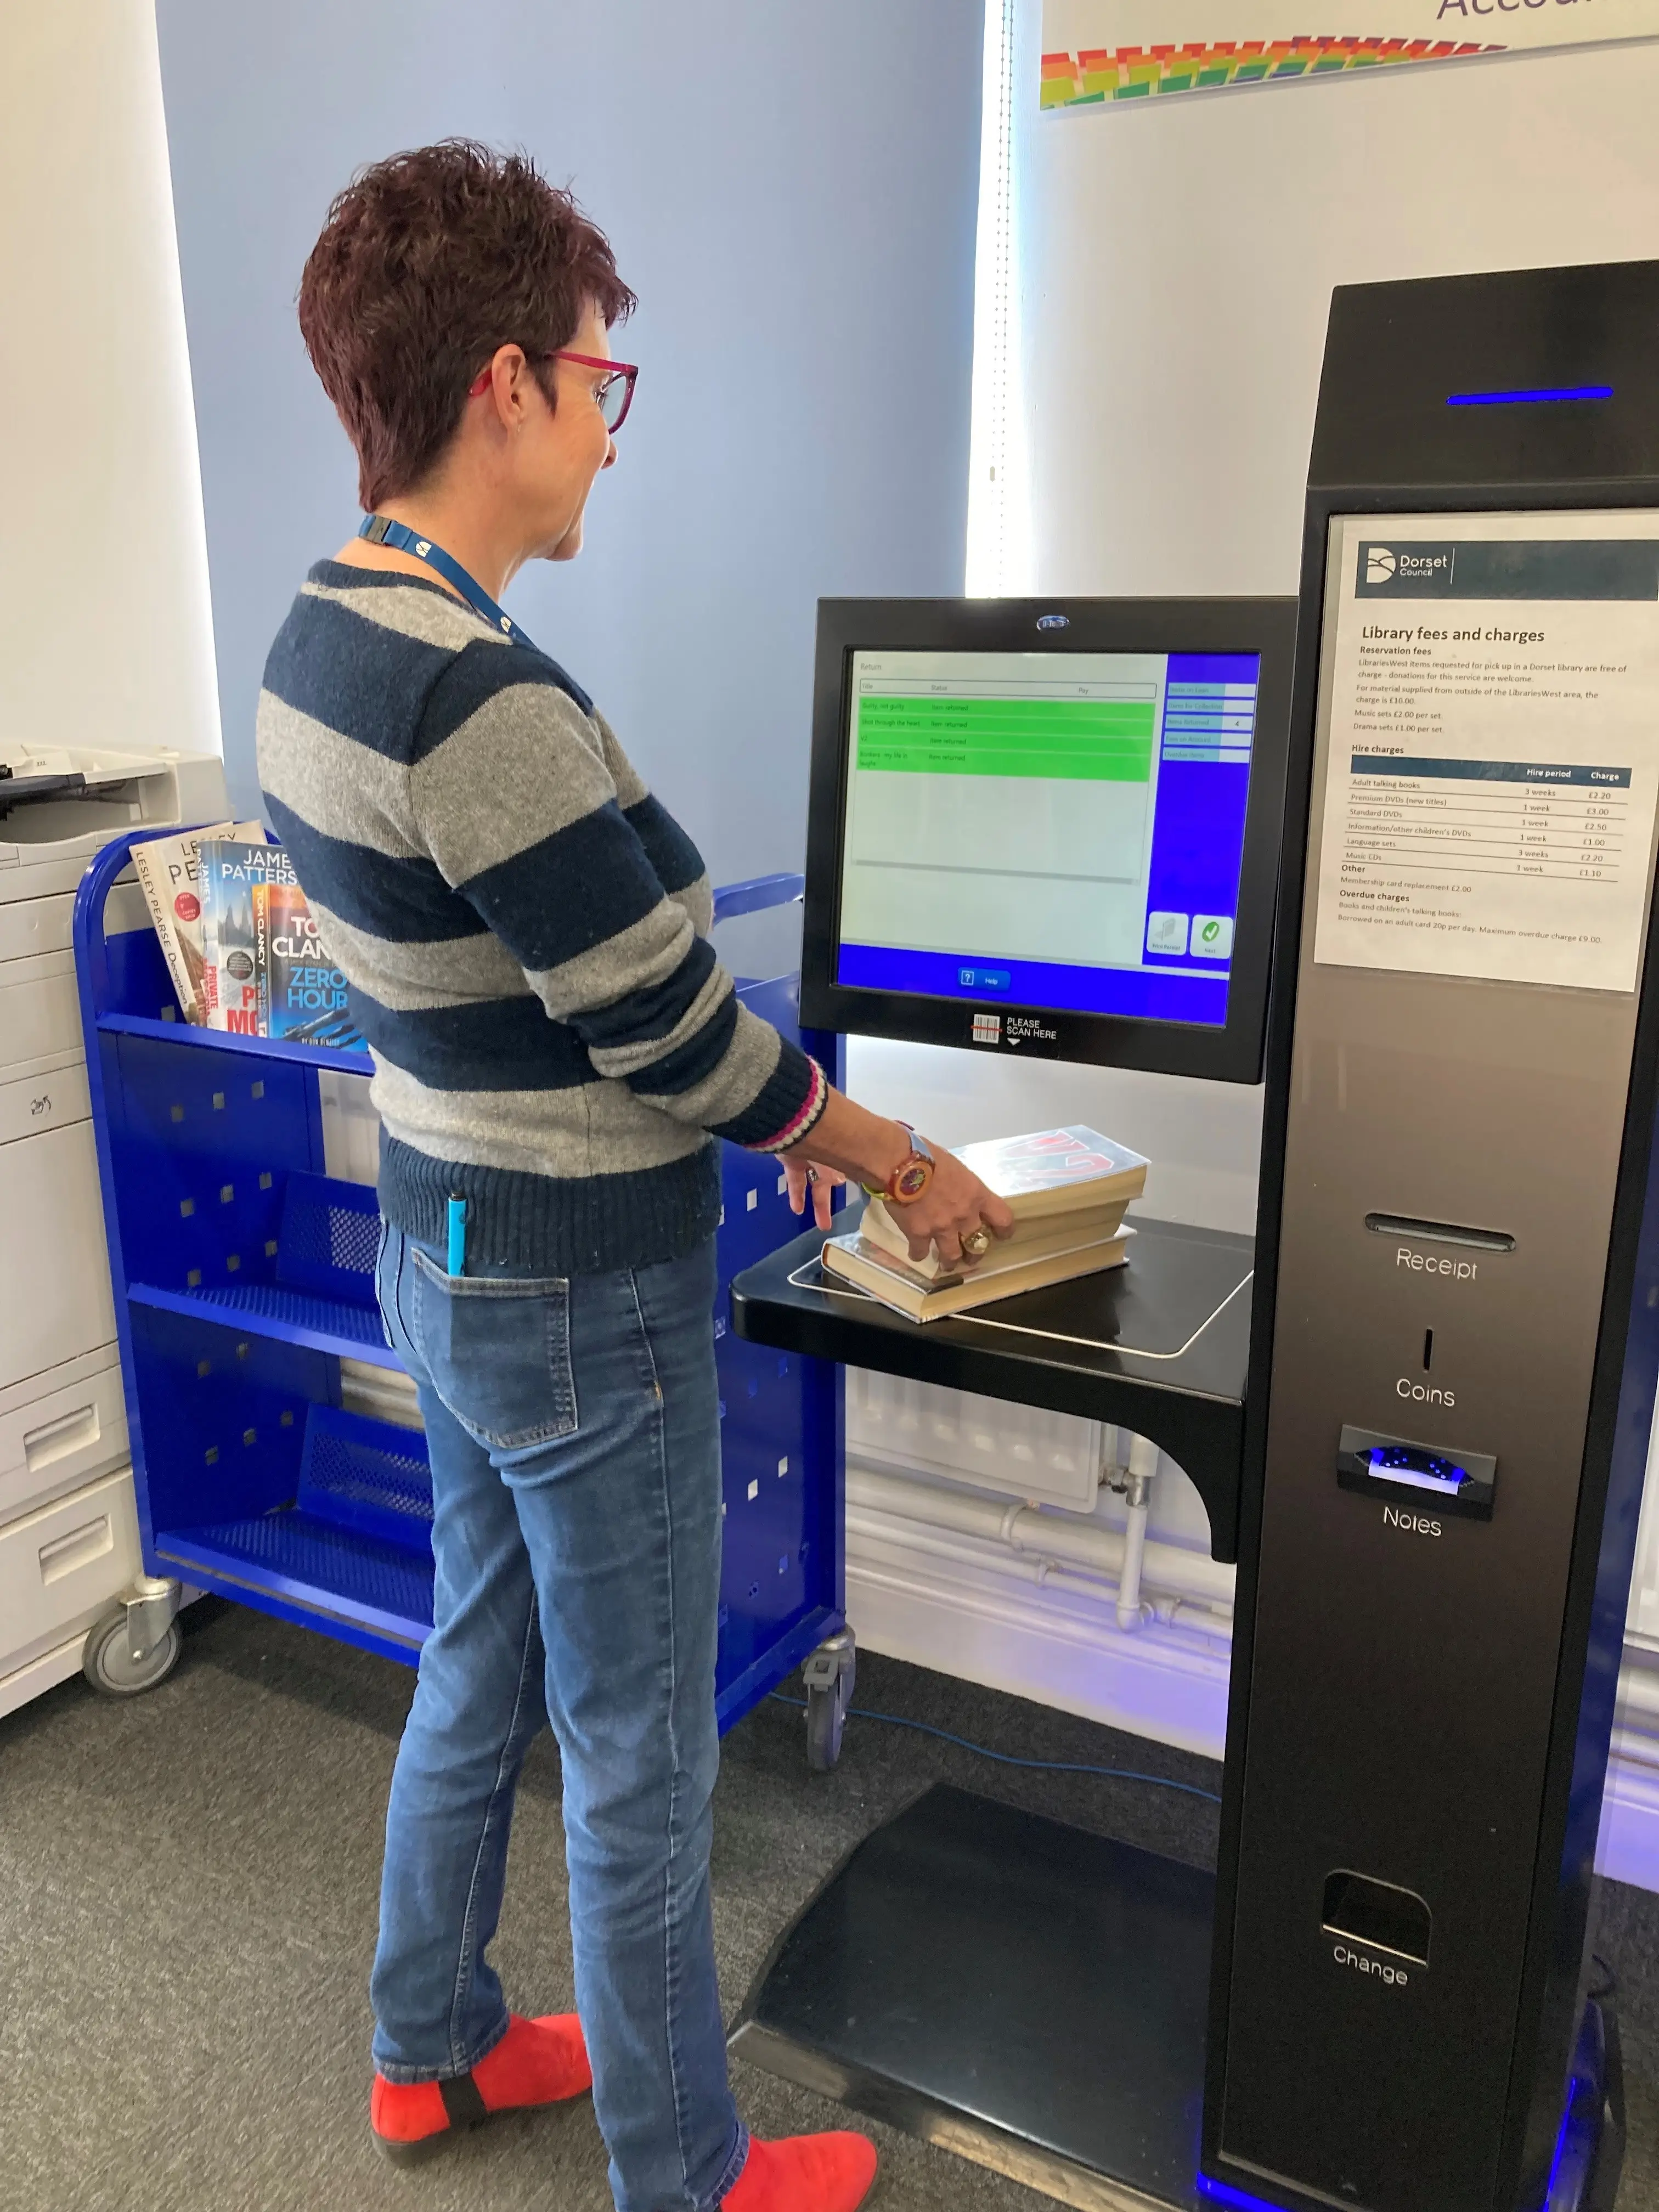 This is a picture of a library assistant helping to check out books with the self service machine.